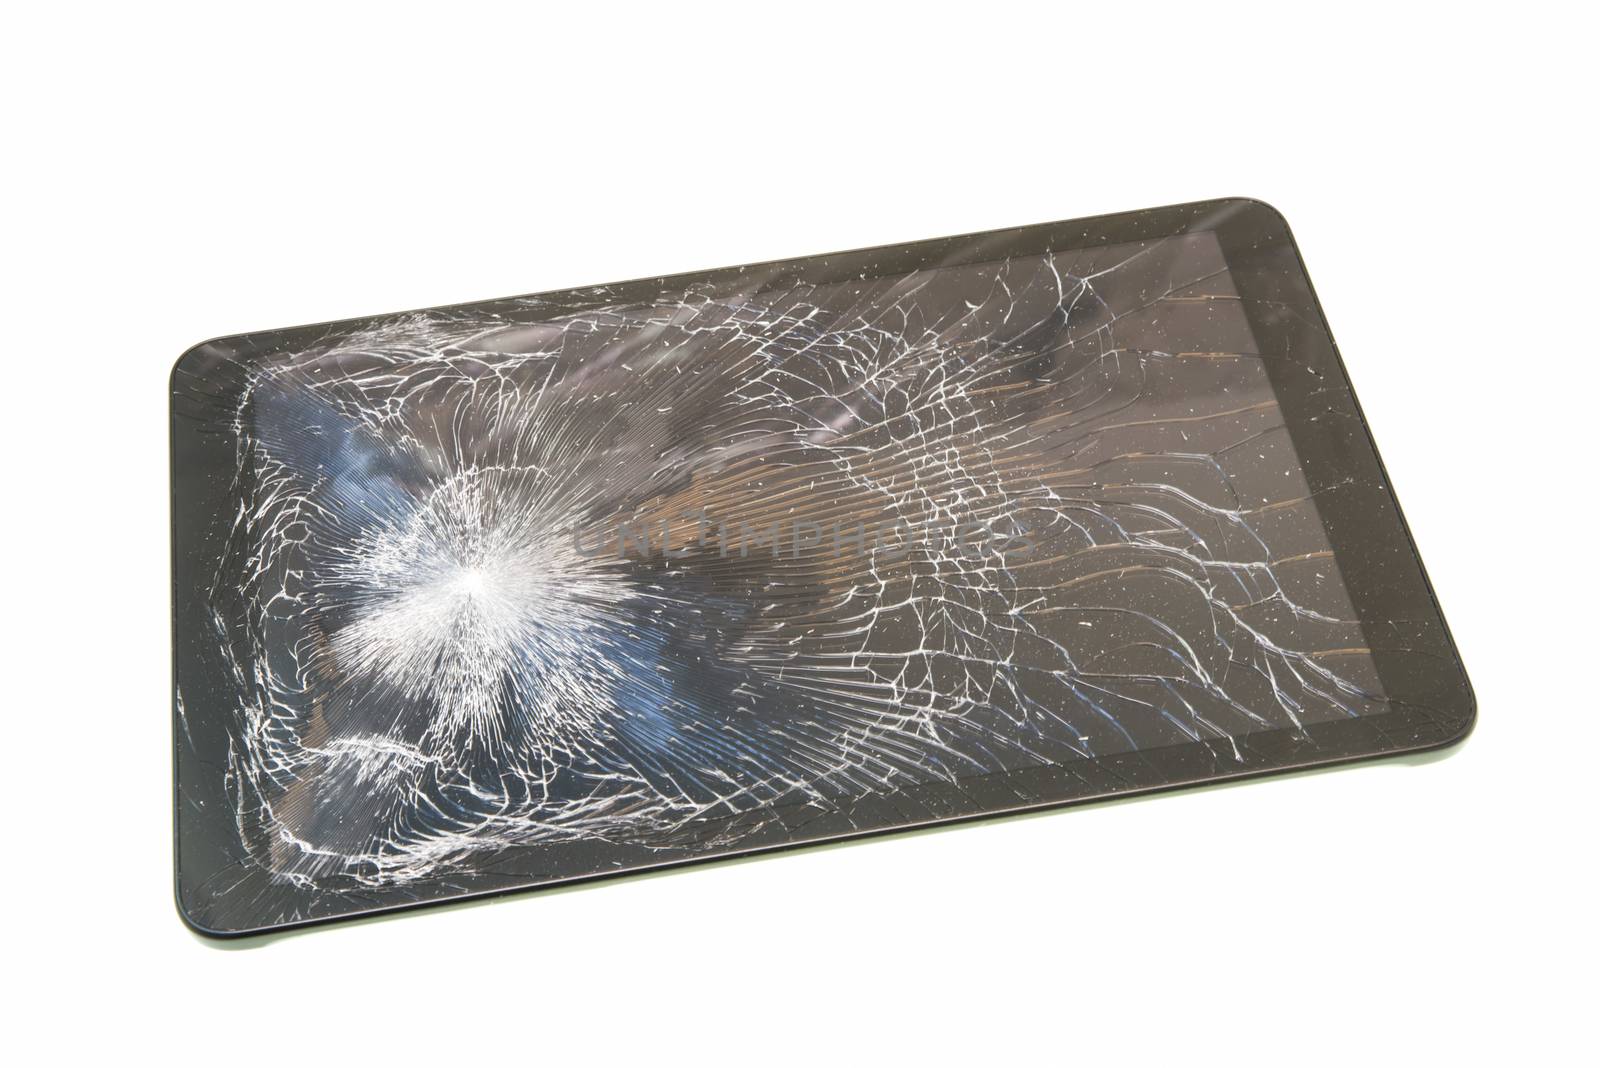 Cracked tablet screen by savcoco